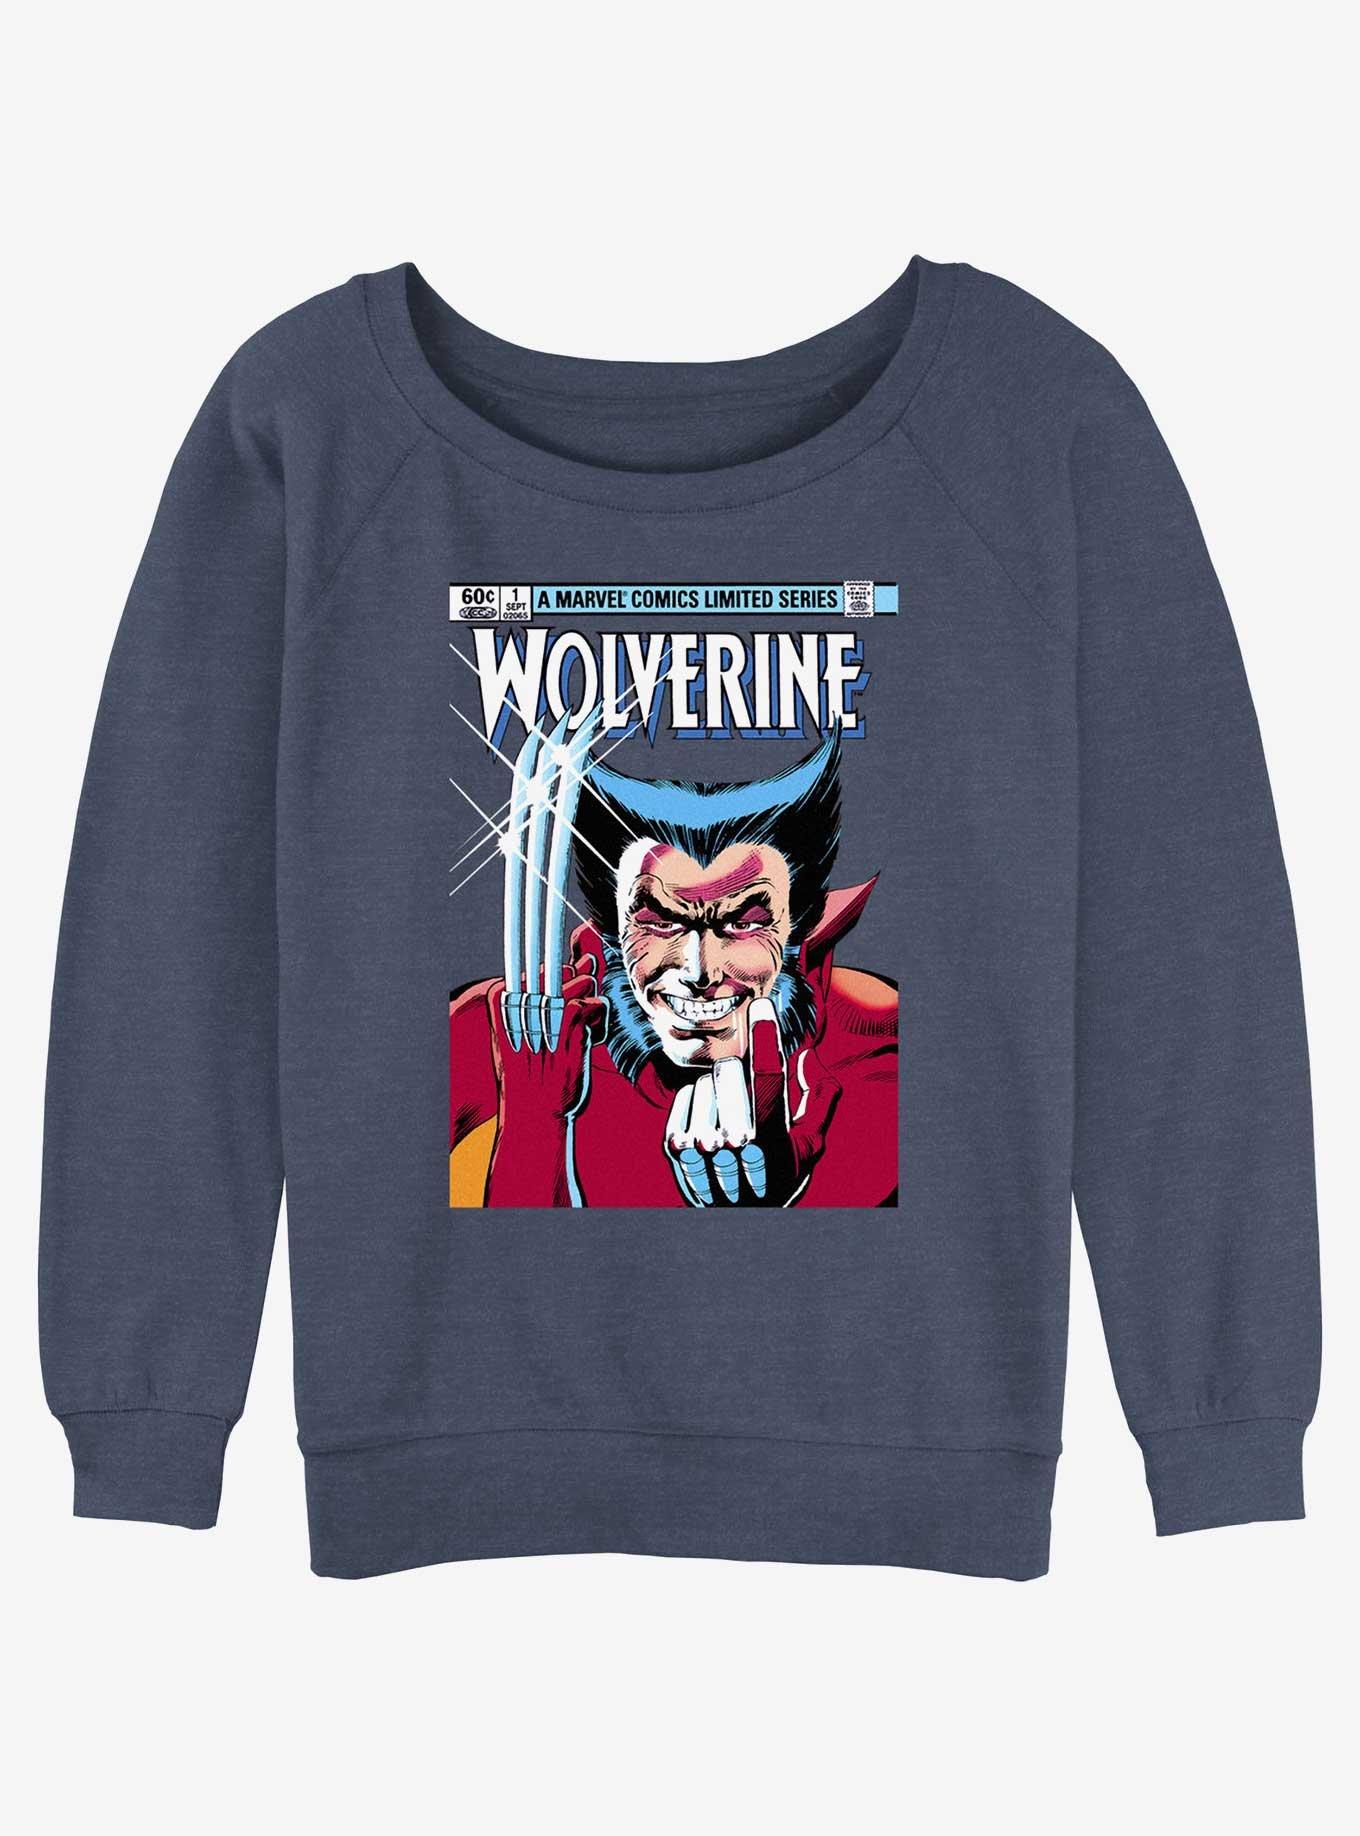 Wolverine 1st Issue Comic Cover Womens Slouchy Sweatshirt, BLUEHTR, hi-res